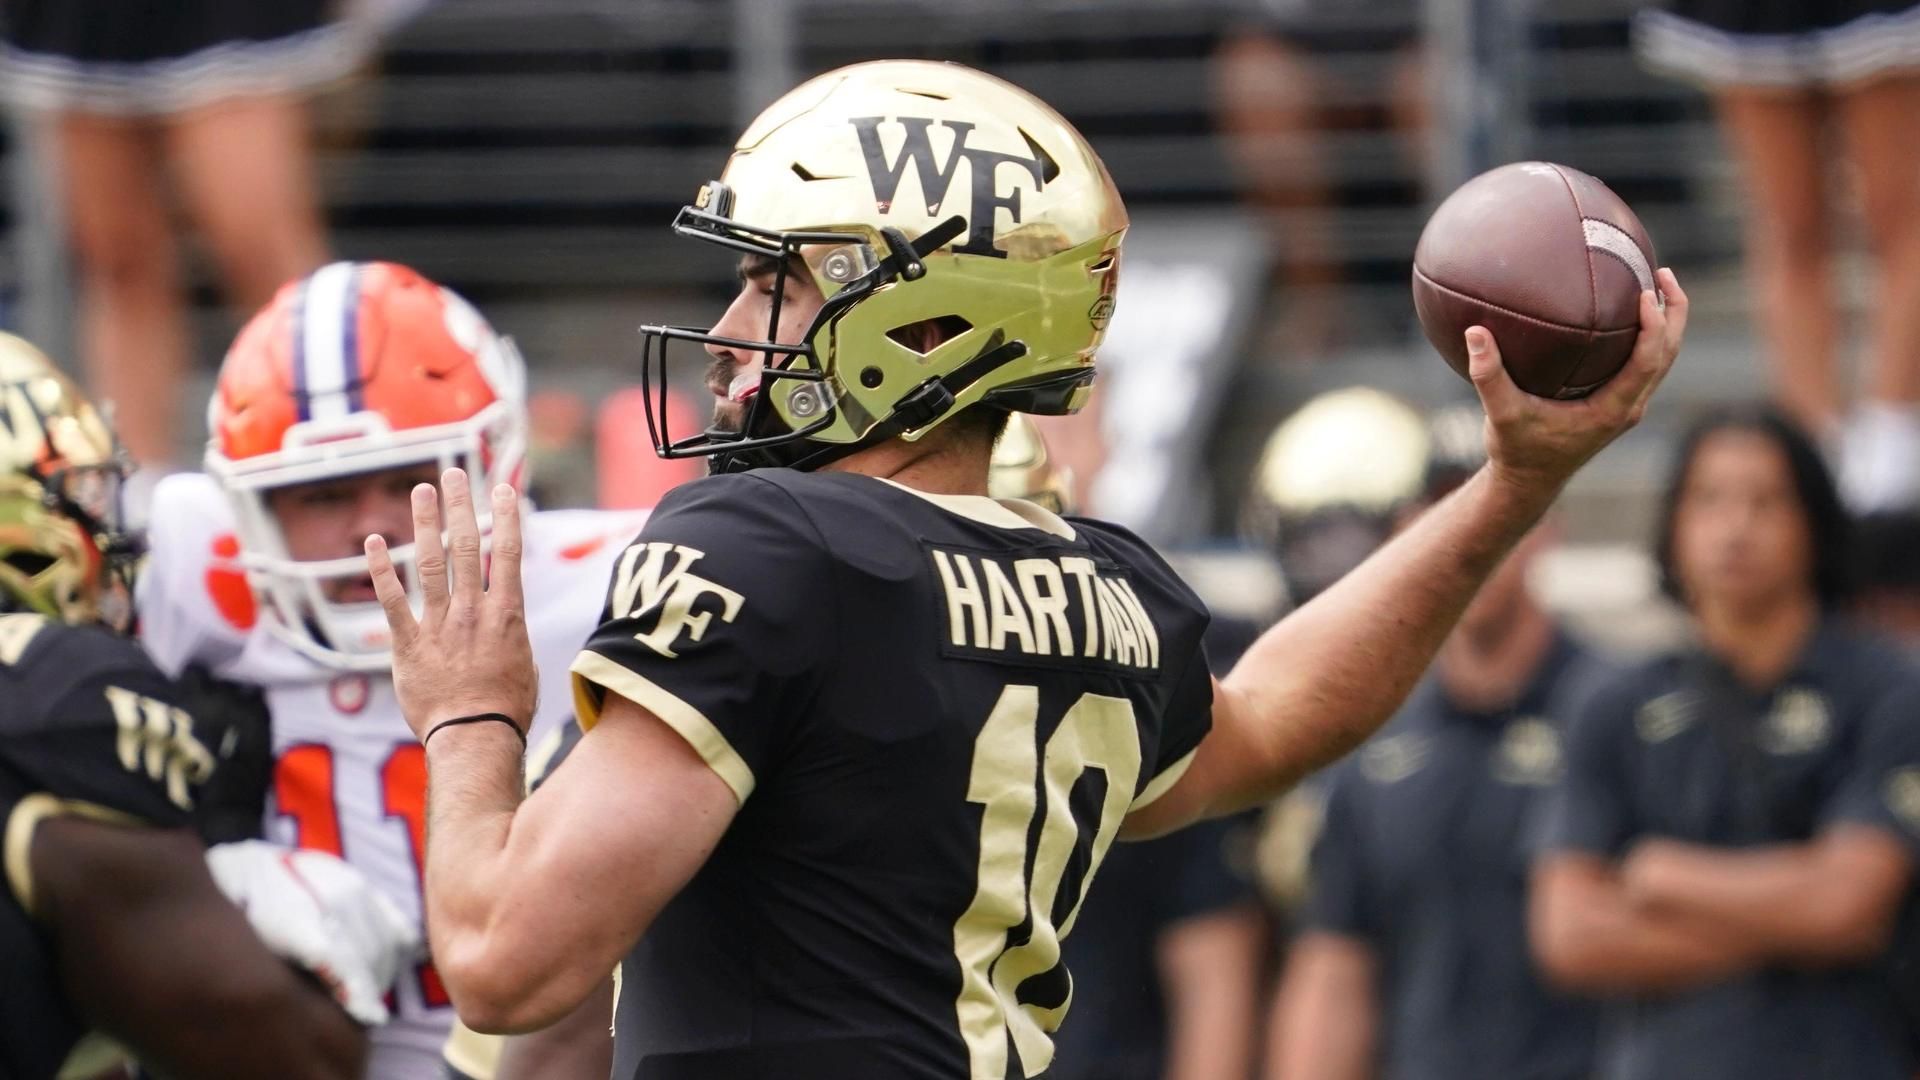 Hartman sets singlegame Wake Forest record with TD pass in overtime